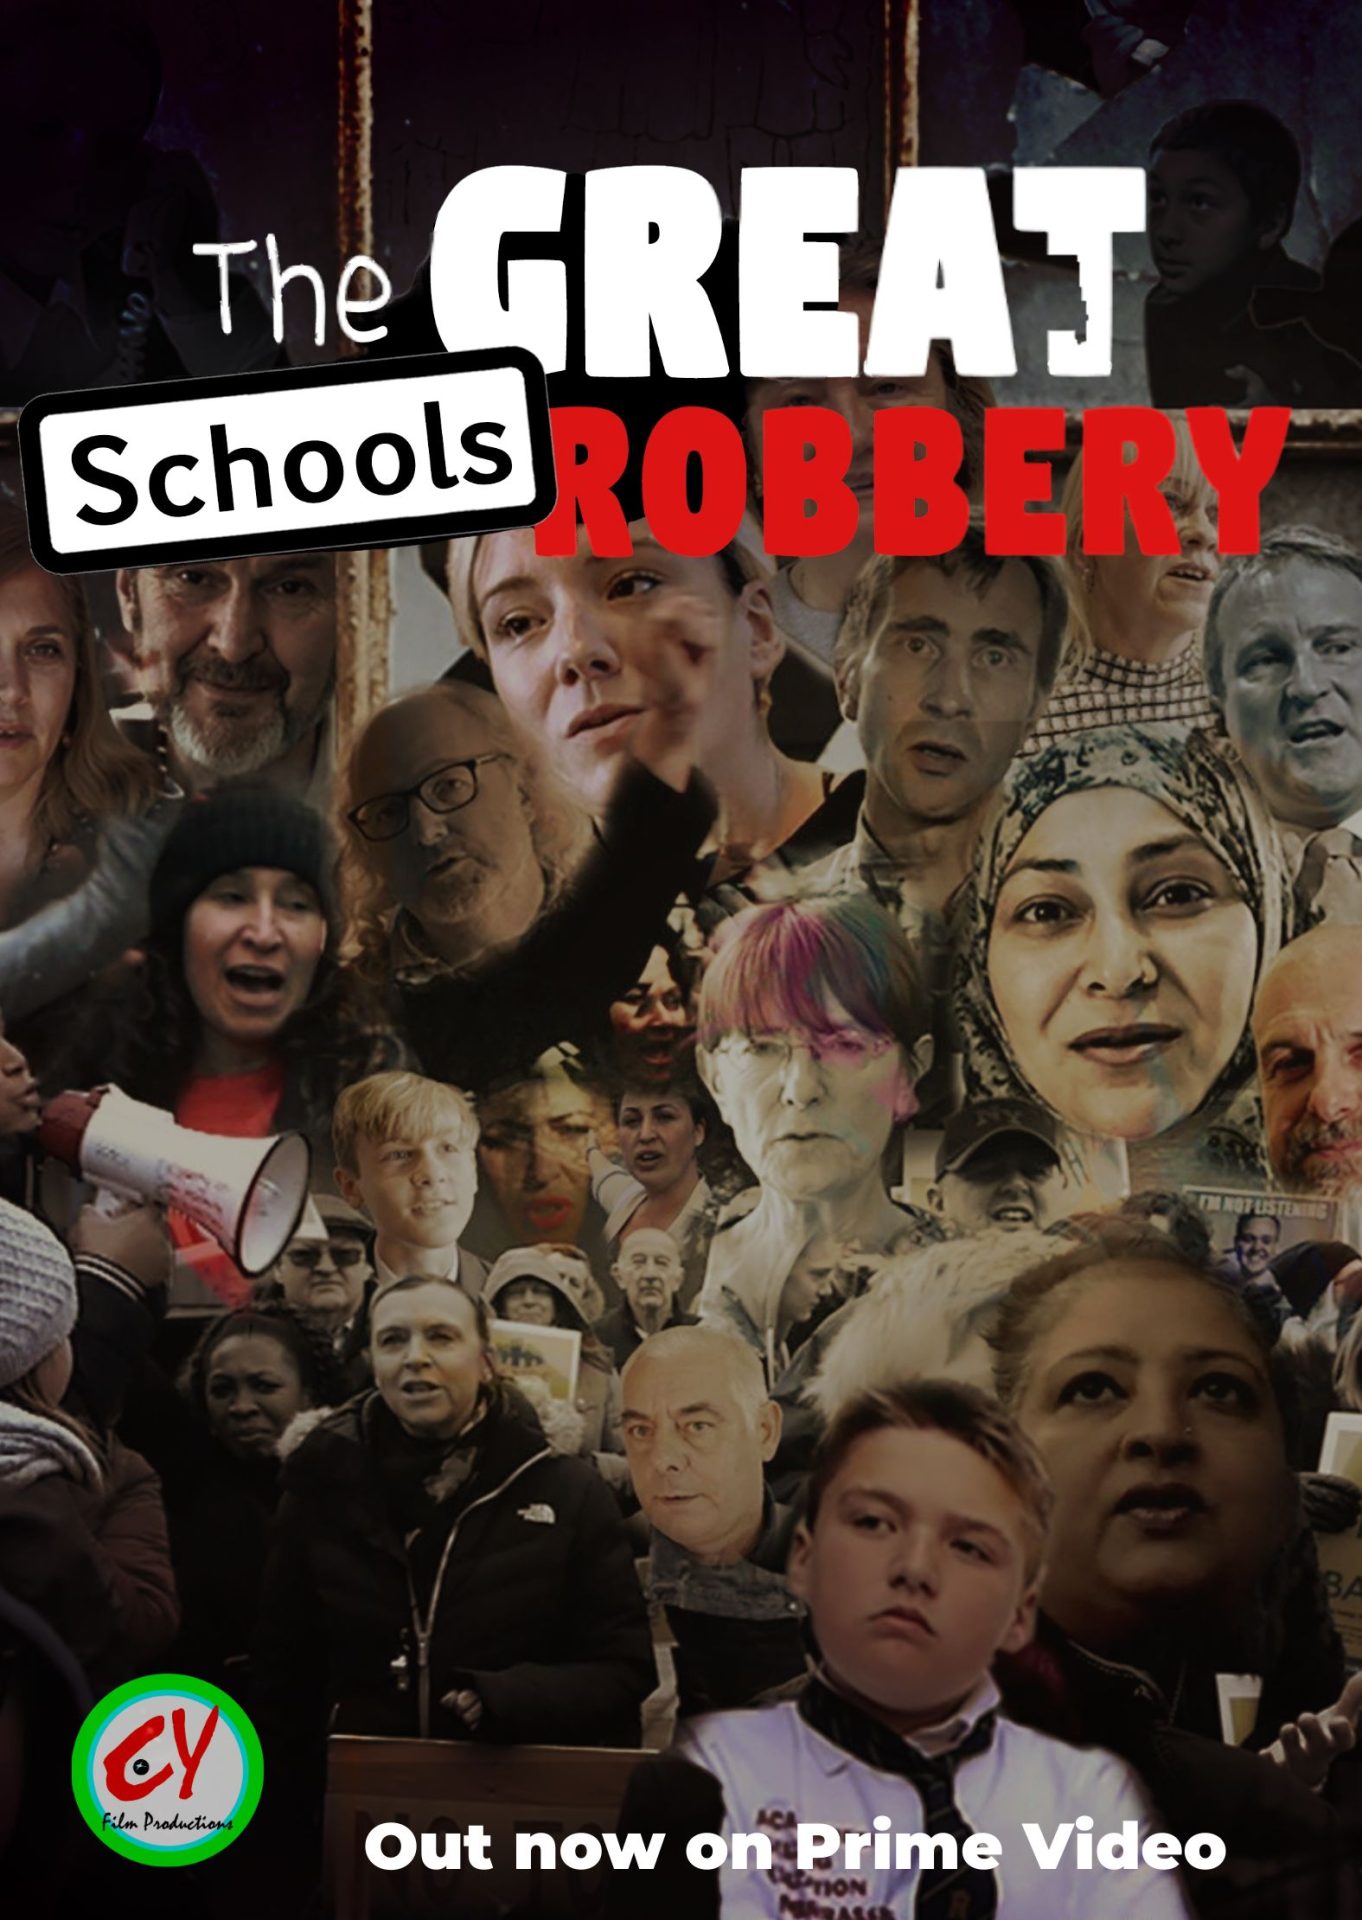 The Great Schools Robbery poster